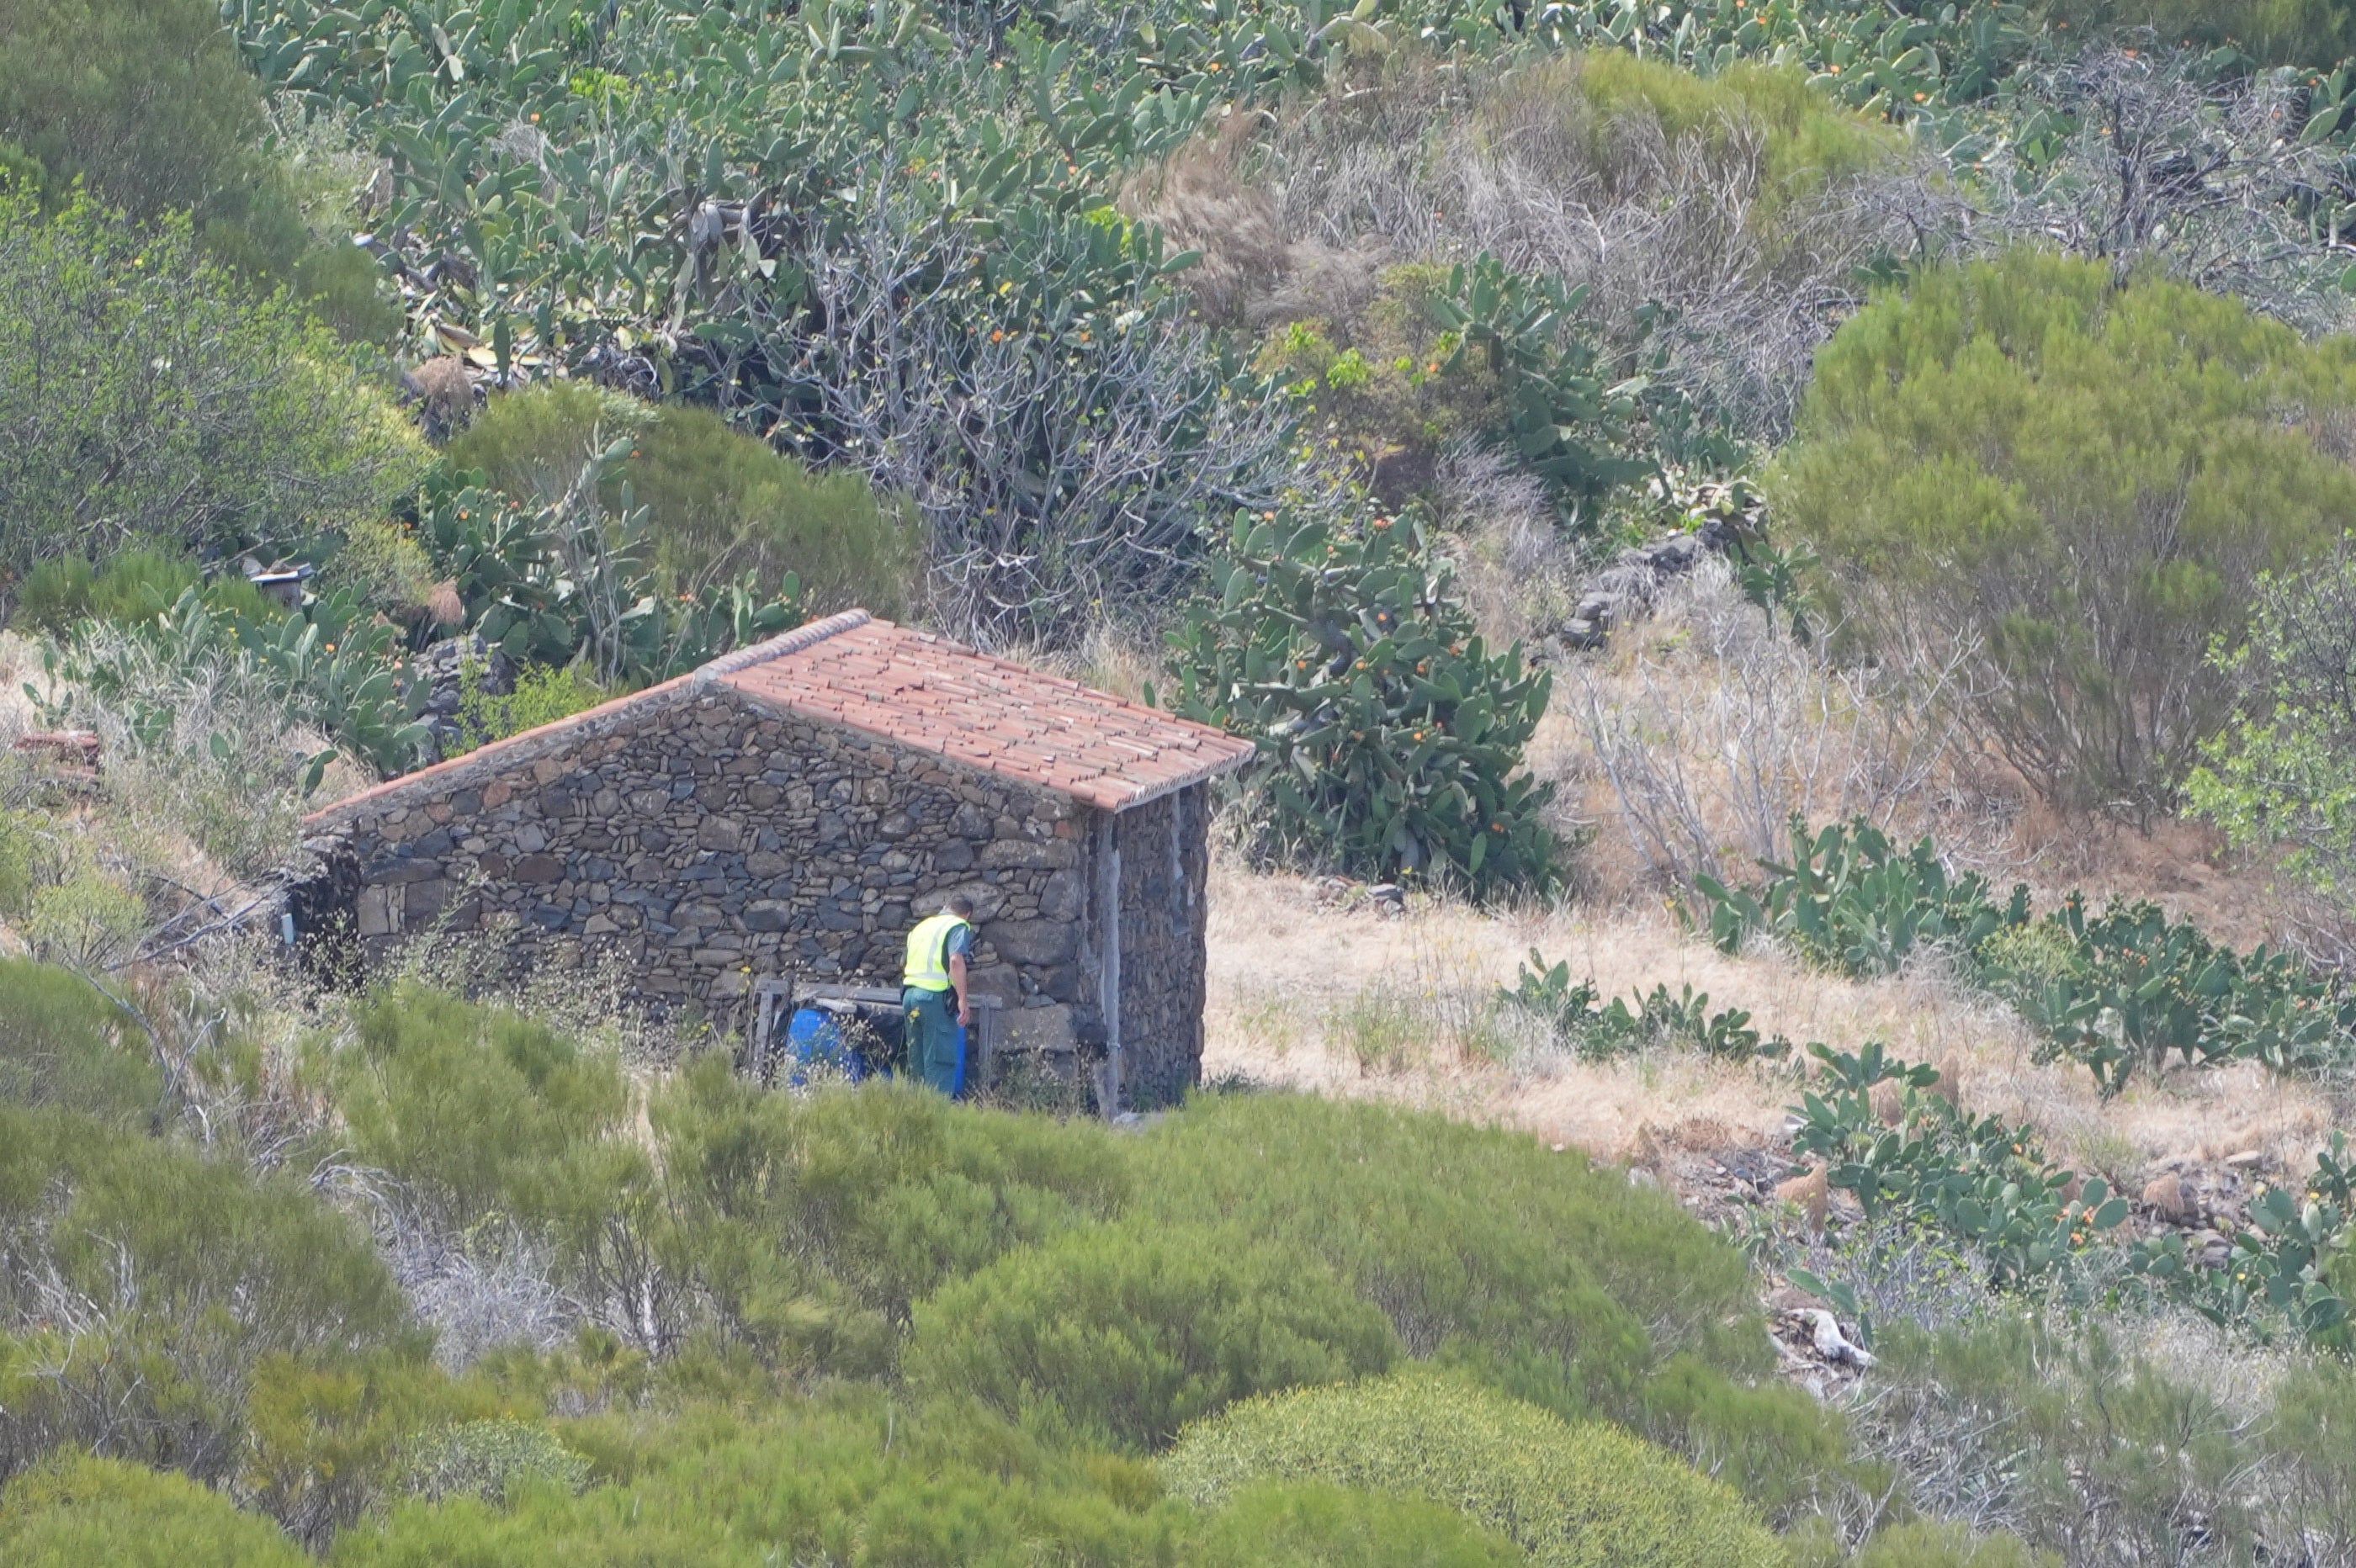 A member of a search and rescue team search near the last known location of Jay Slater